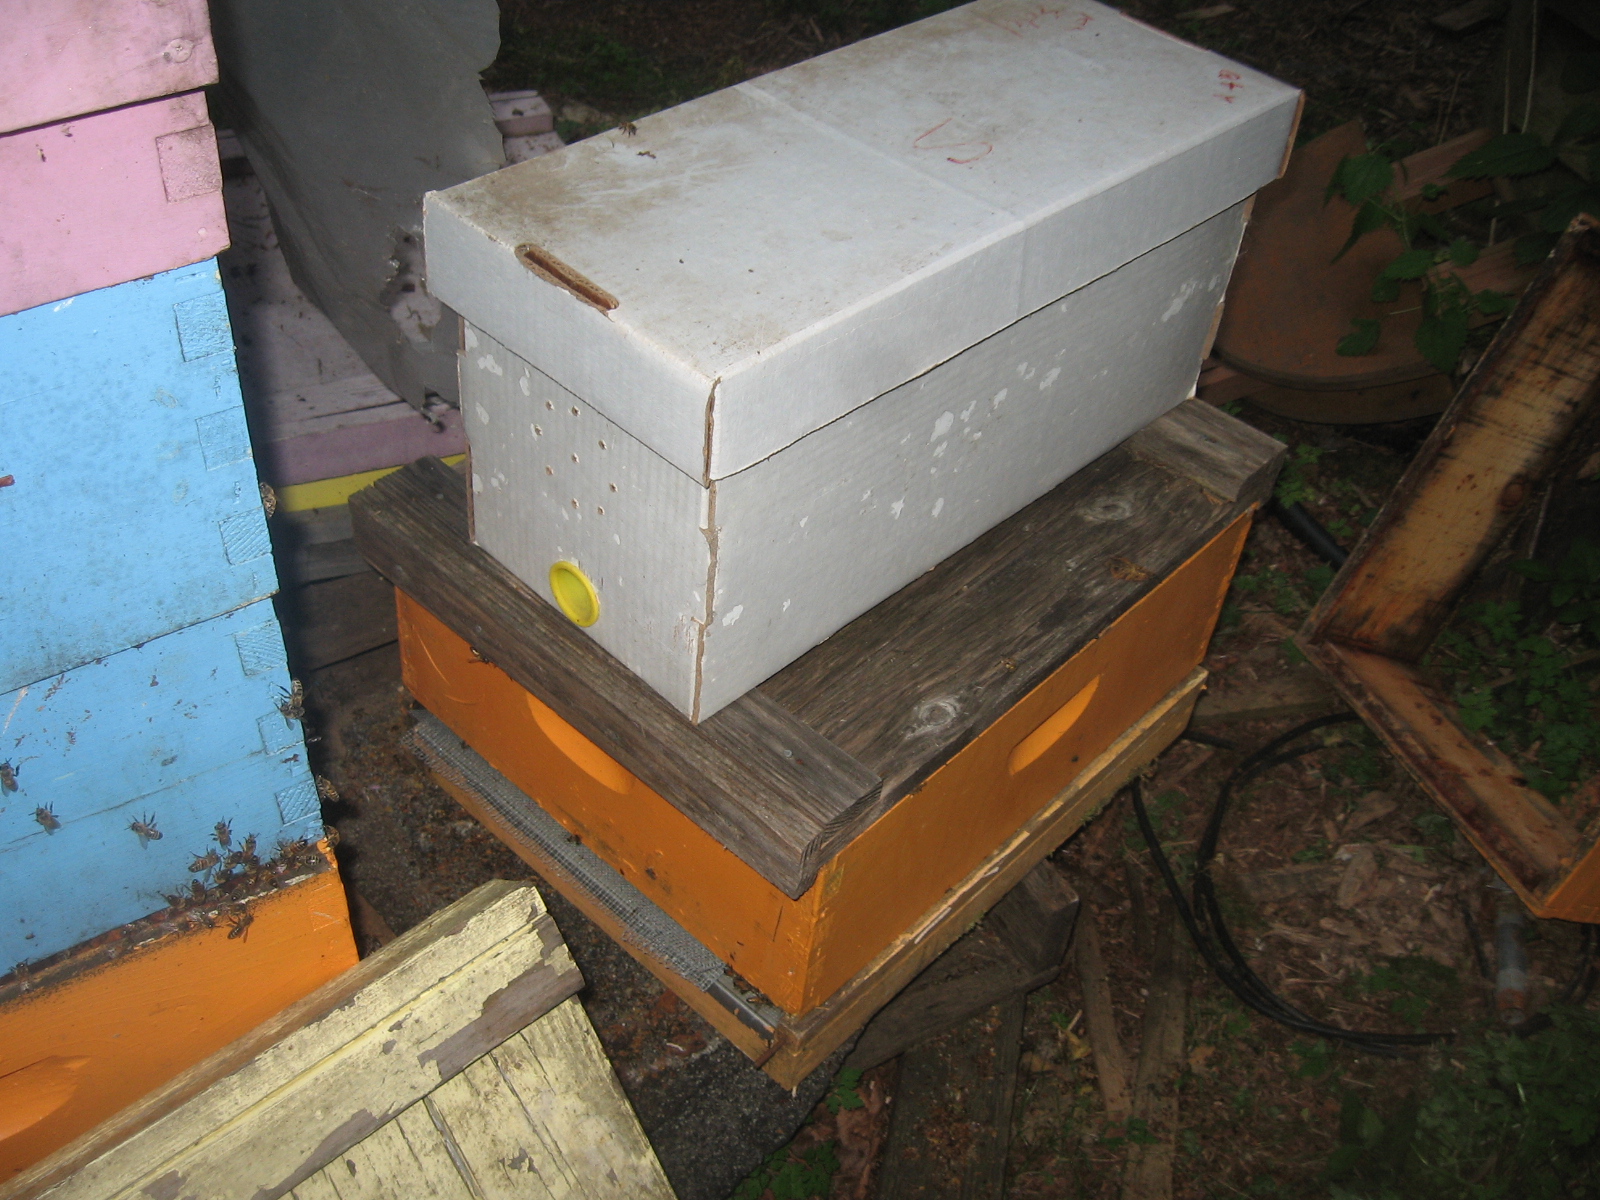 Boxed bees await a new location